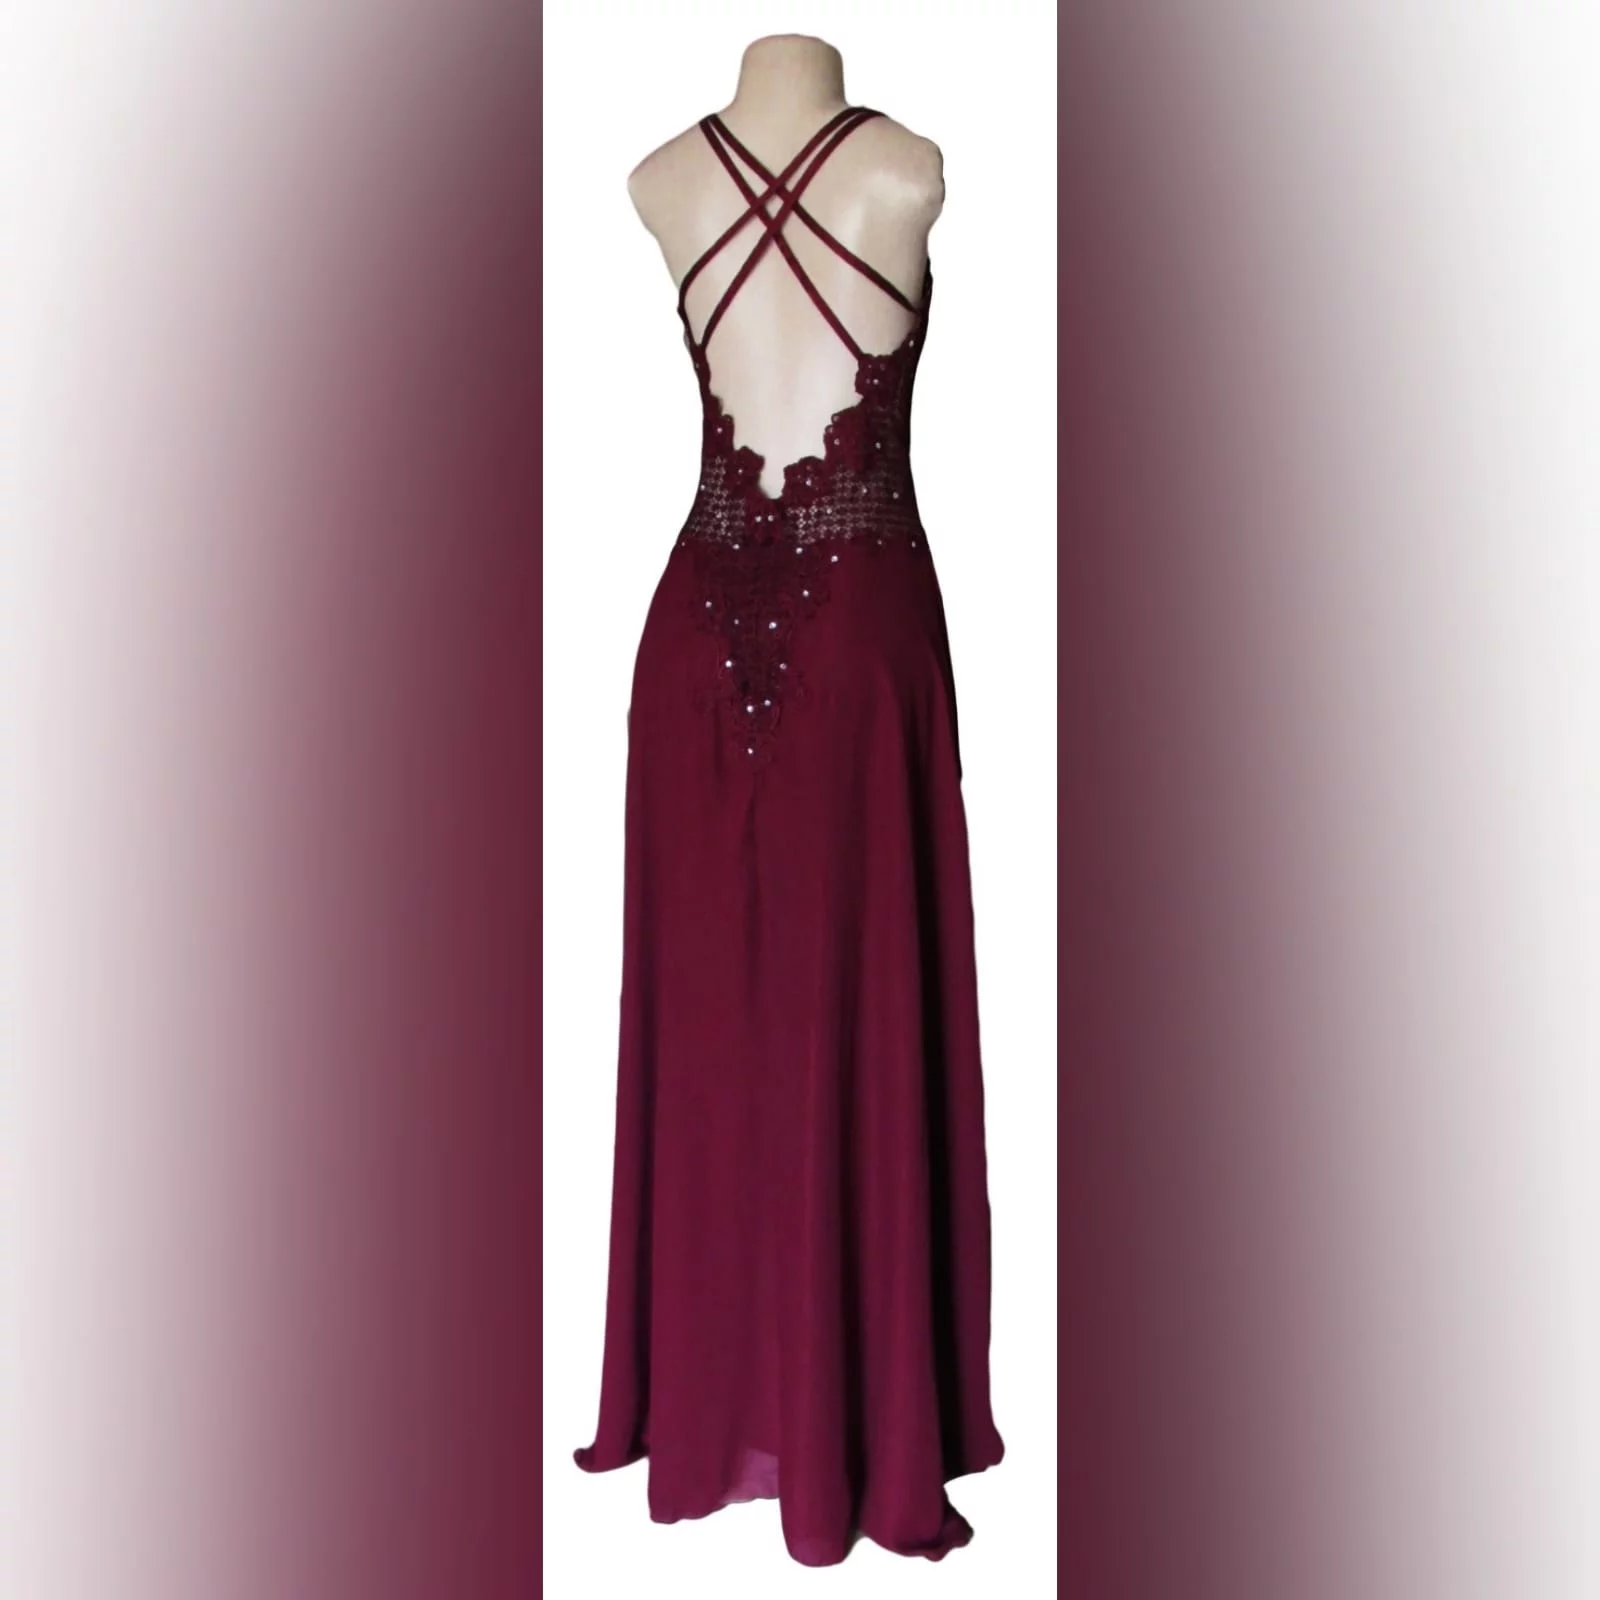 Burgundy chiffon and lace matric dance dress 8 burgundy chiffon and lace matric farewell dress. Bodice in lace, with a v neckline and v low open back, with double shoulder crossed straps. Bodice detailed with silver beads. Bottom in flowy chiffon with a slit.